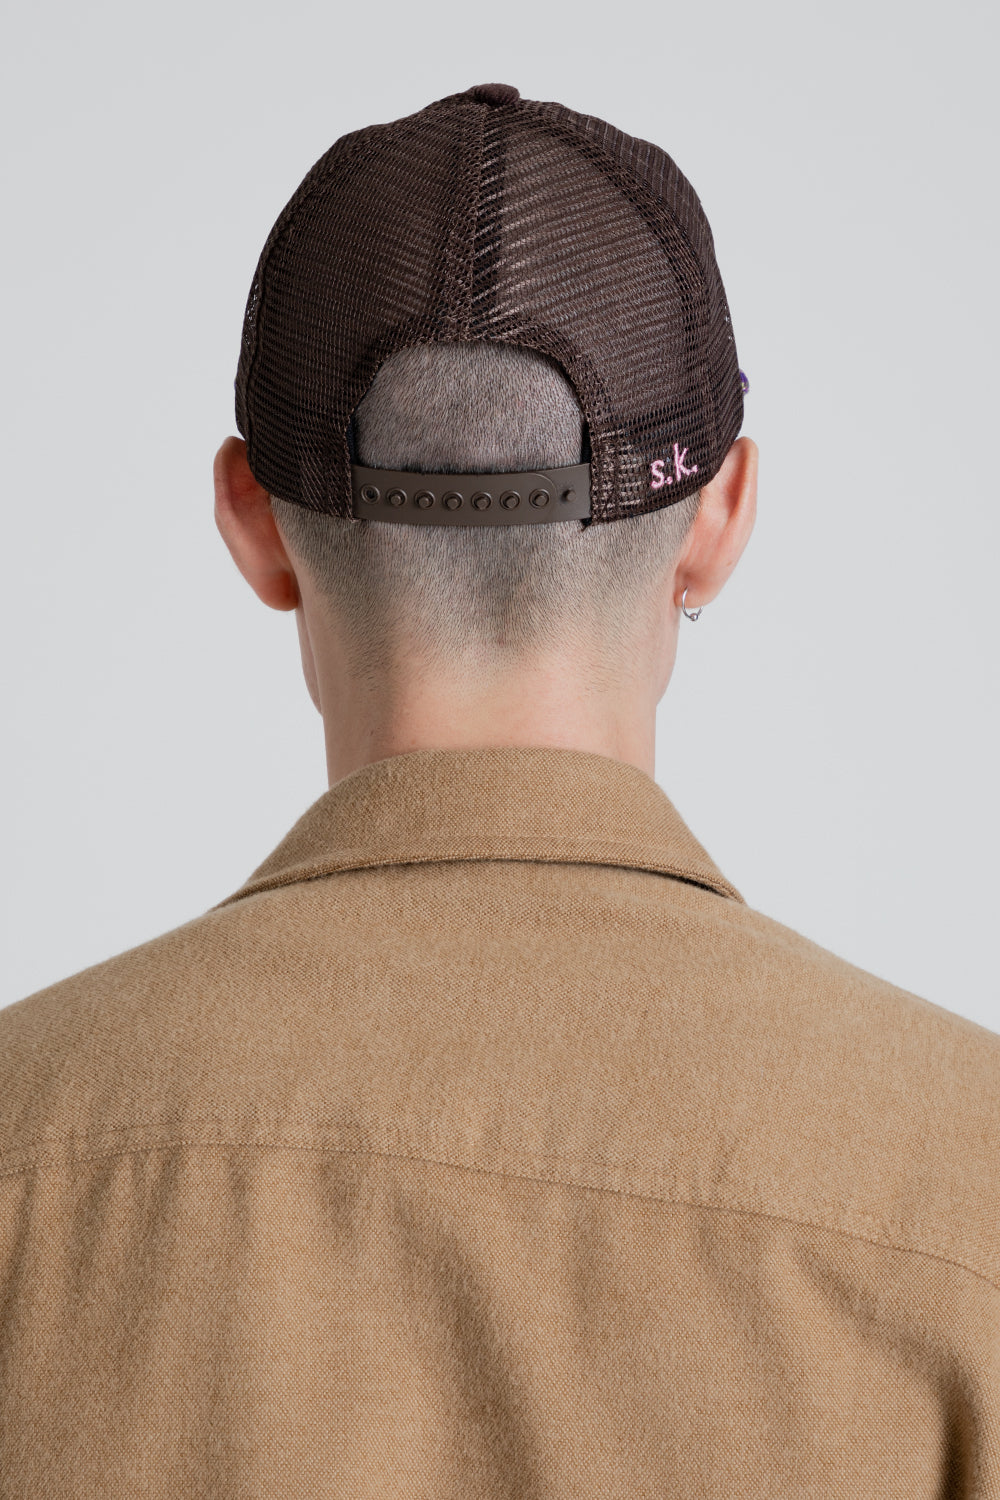 S.K. Manor Hill Mesh Back Cap in Brown Cotton Corduroy